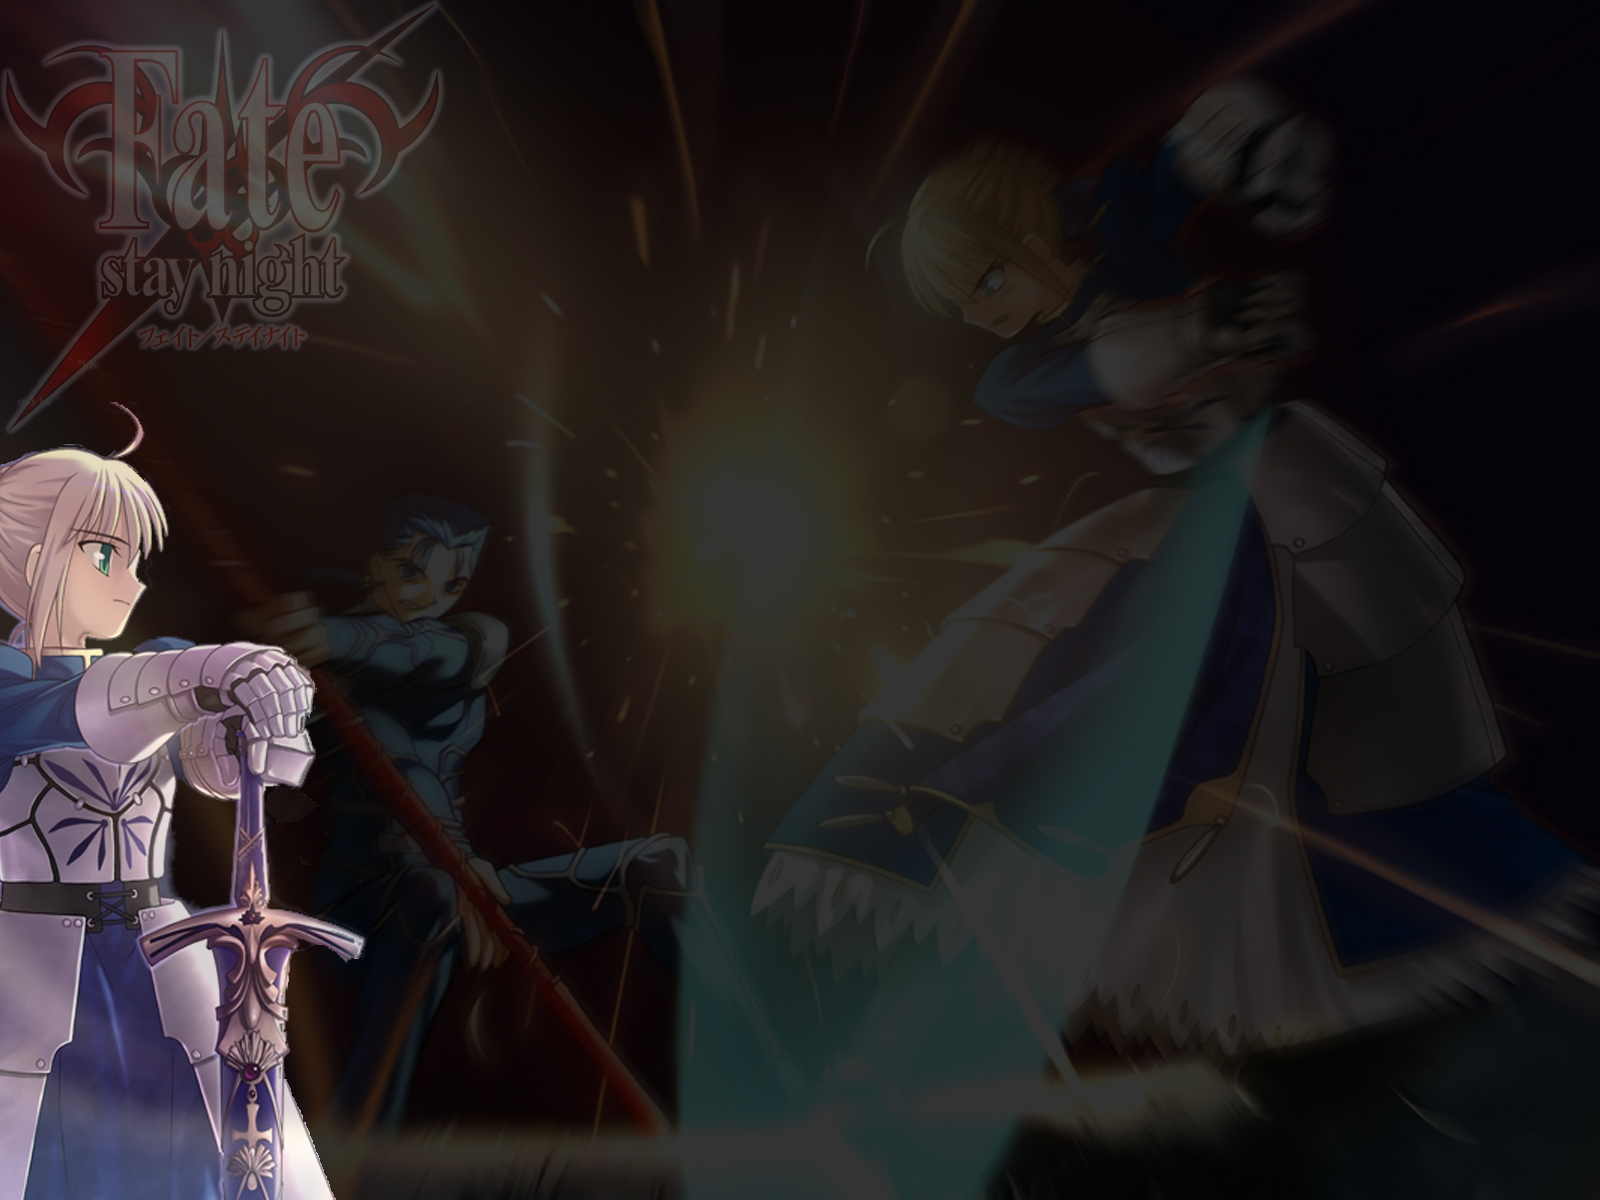 Anime warriors Saber and Lancer in an epic Fate/Stay Night battle on a desktop wallpaper.